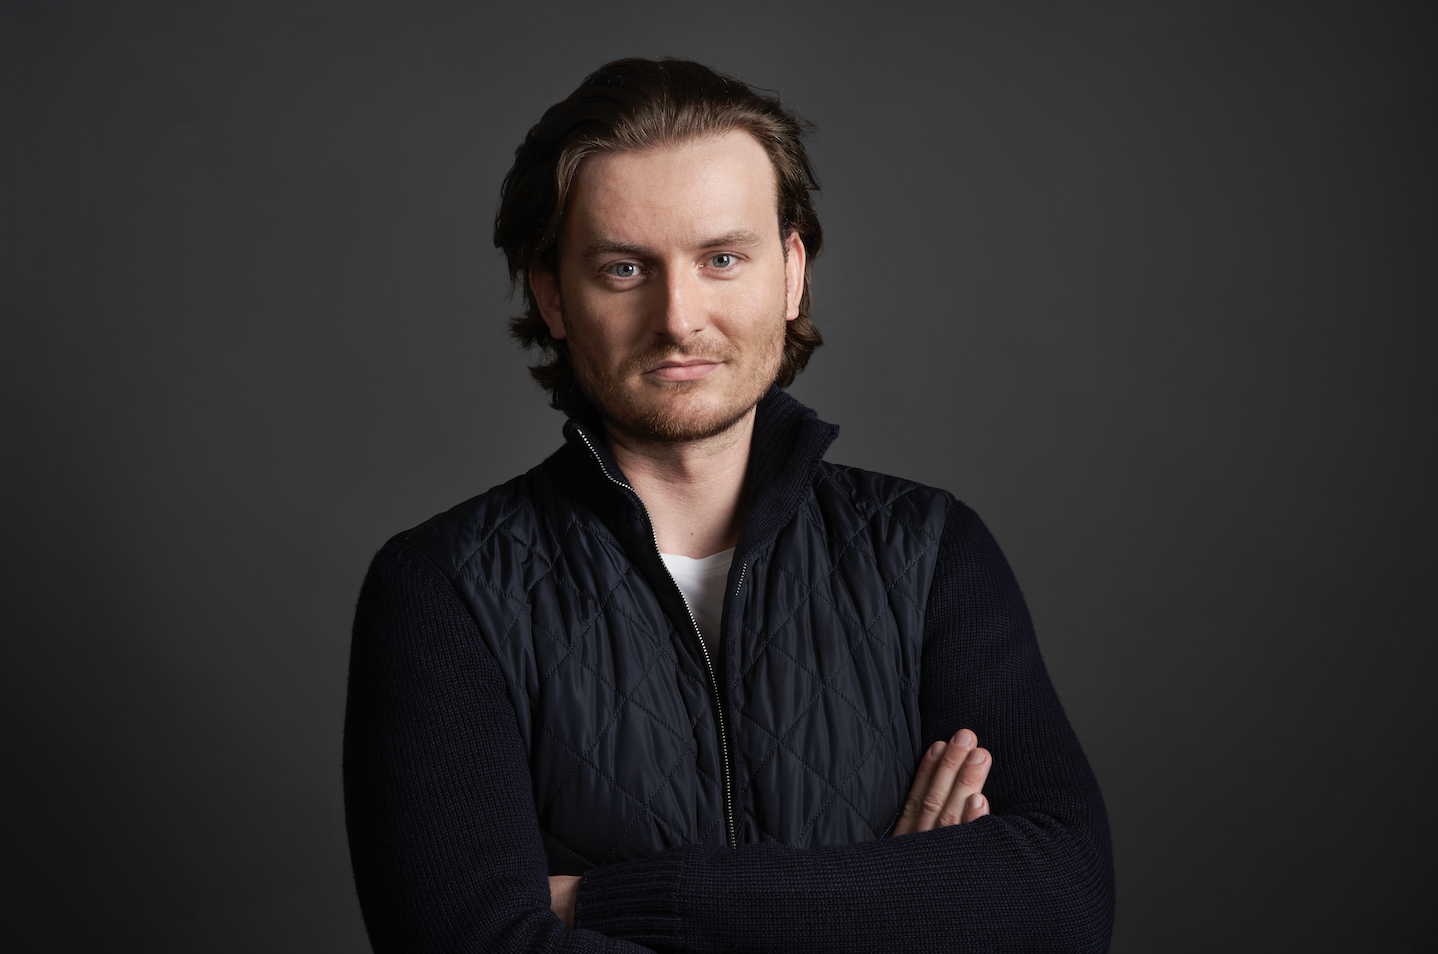 Bitpanda co-founder and CEO Eric Demuth